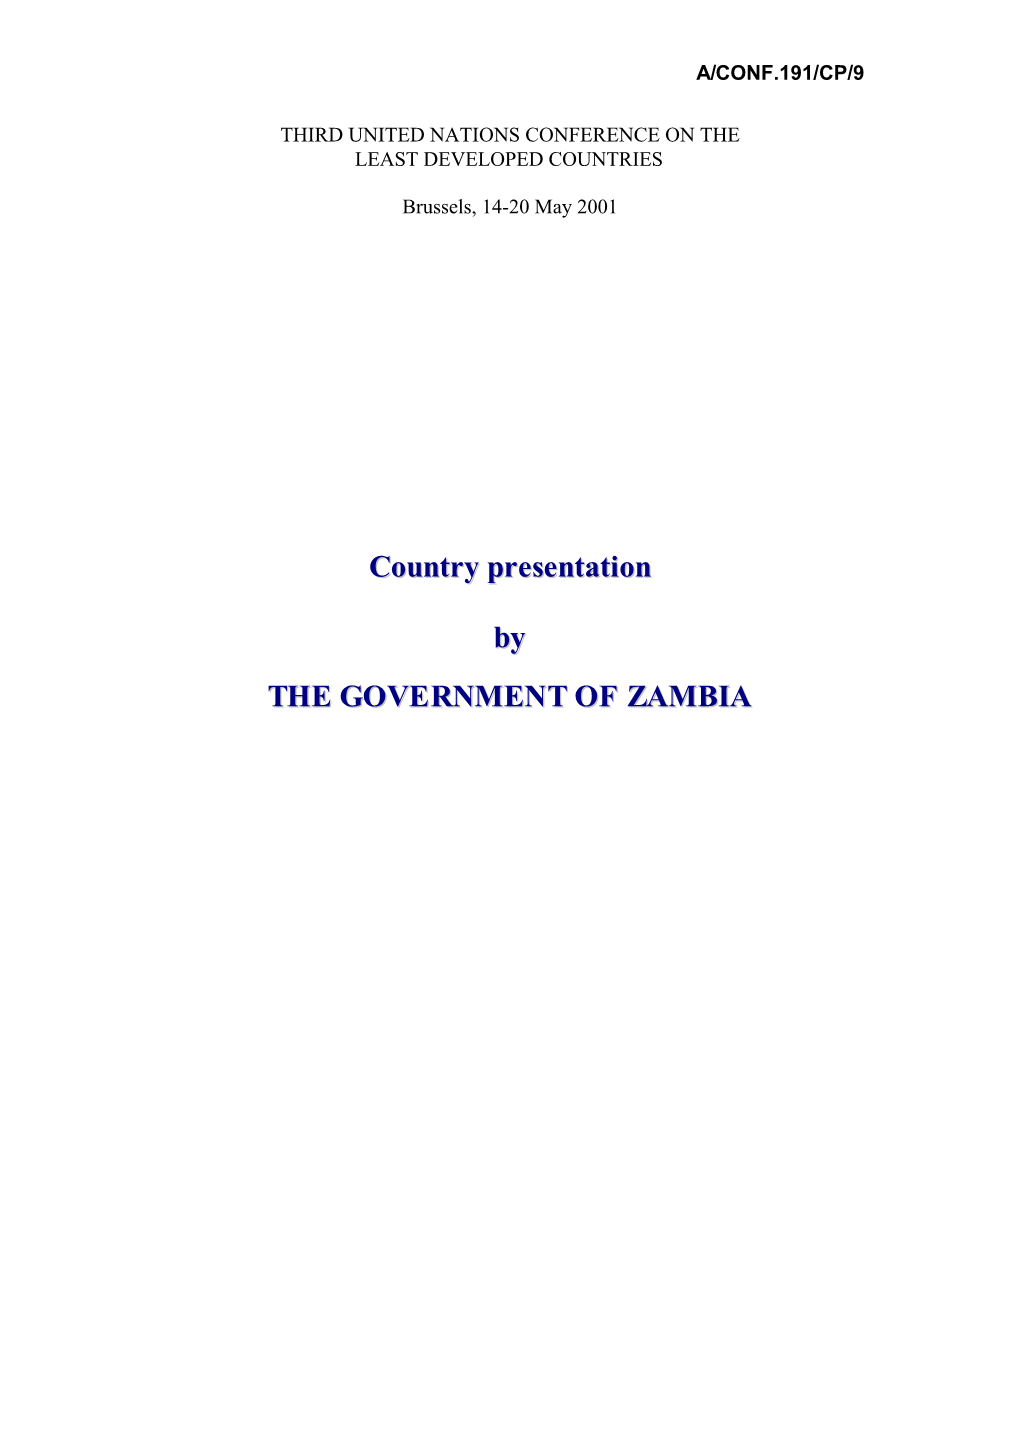 Country Presentation by the GOVERNMENT of ZAMBIA